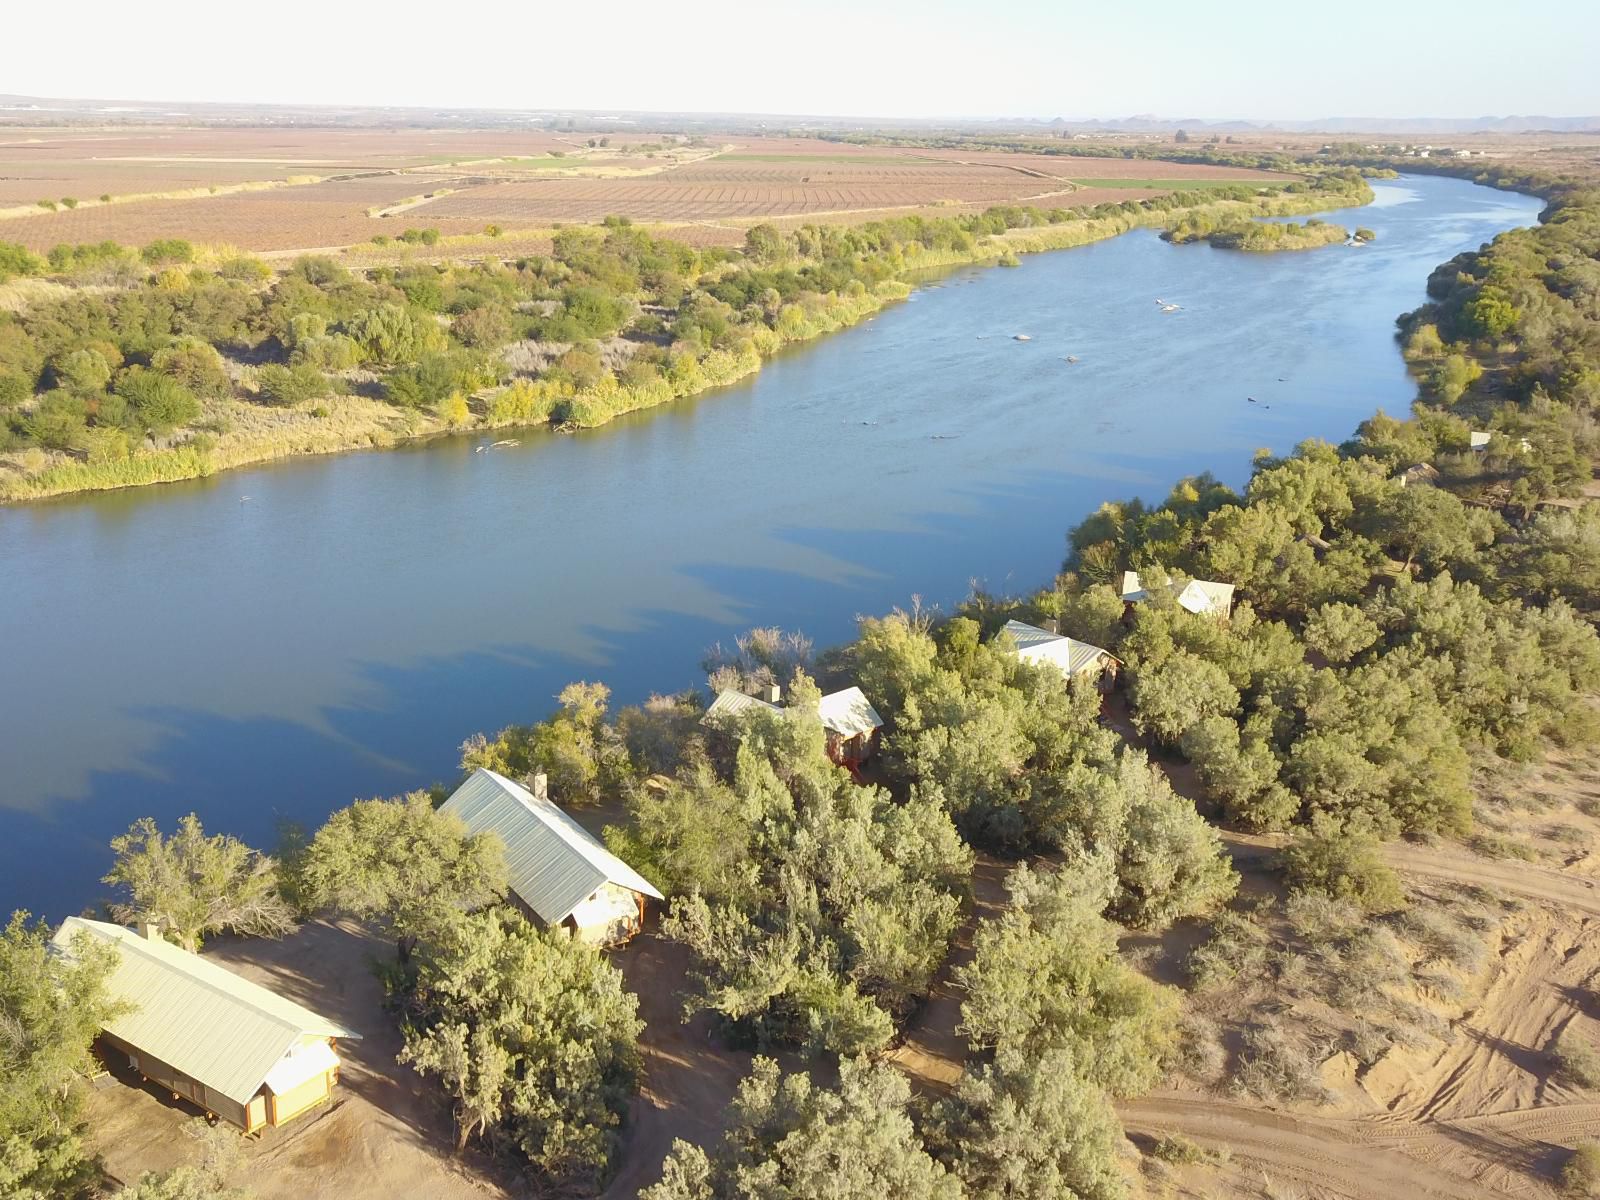 Khamkirri Augrabies Northern Cape South Africa River, Nature, Waters, Aerial Photography, Lowland